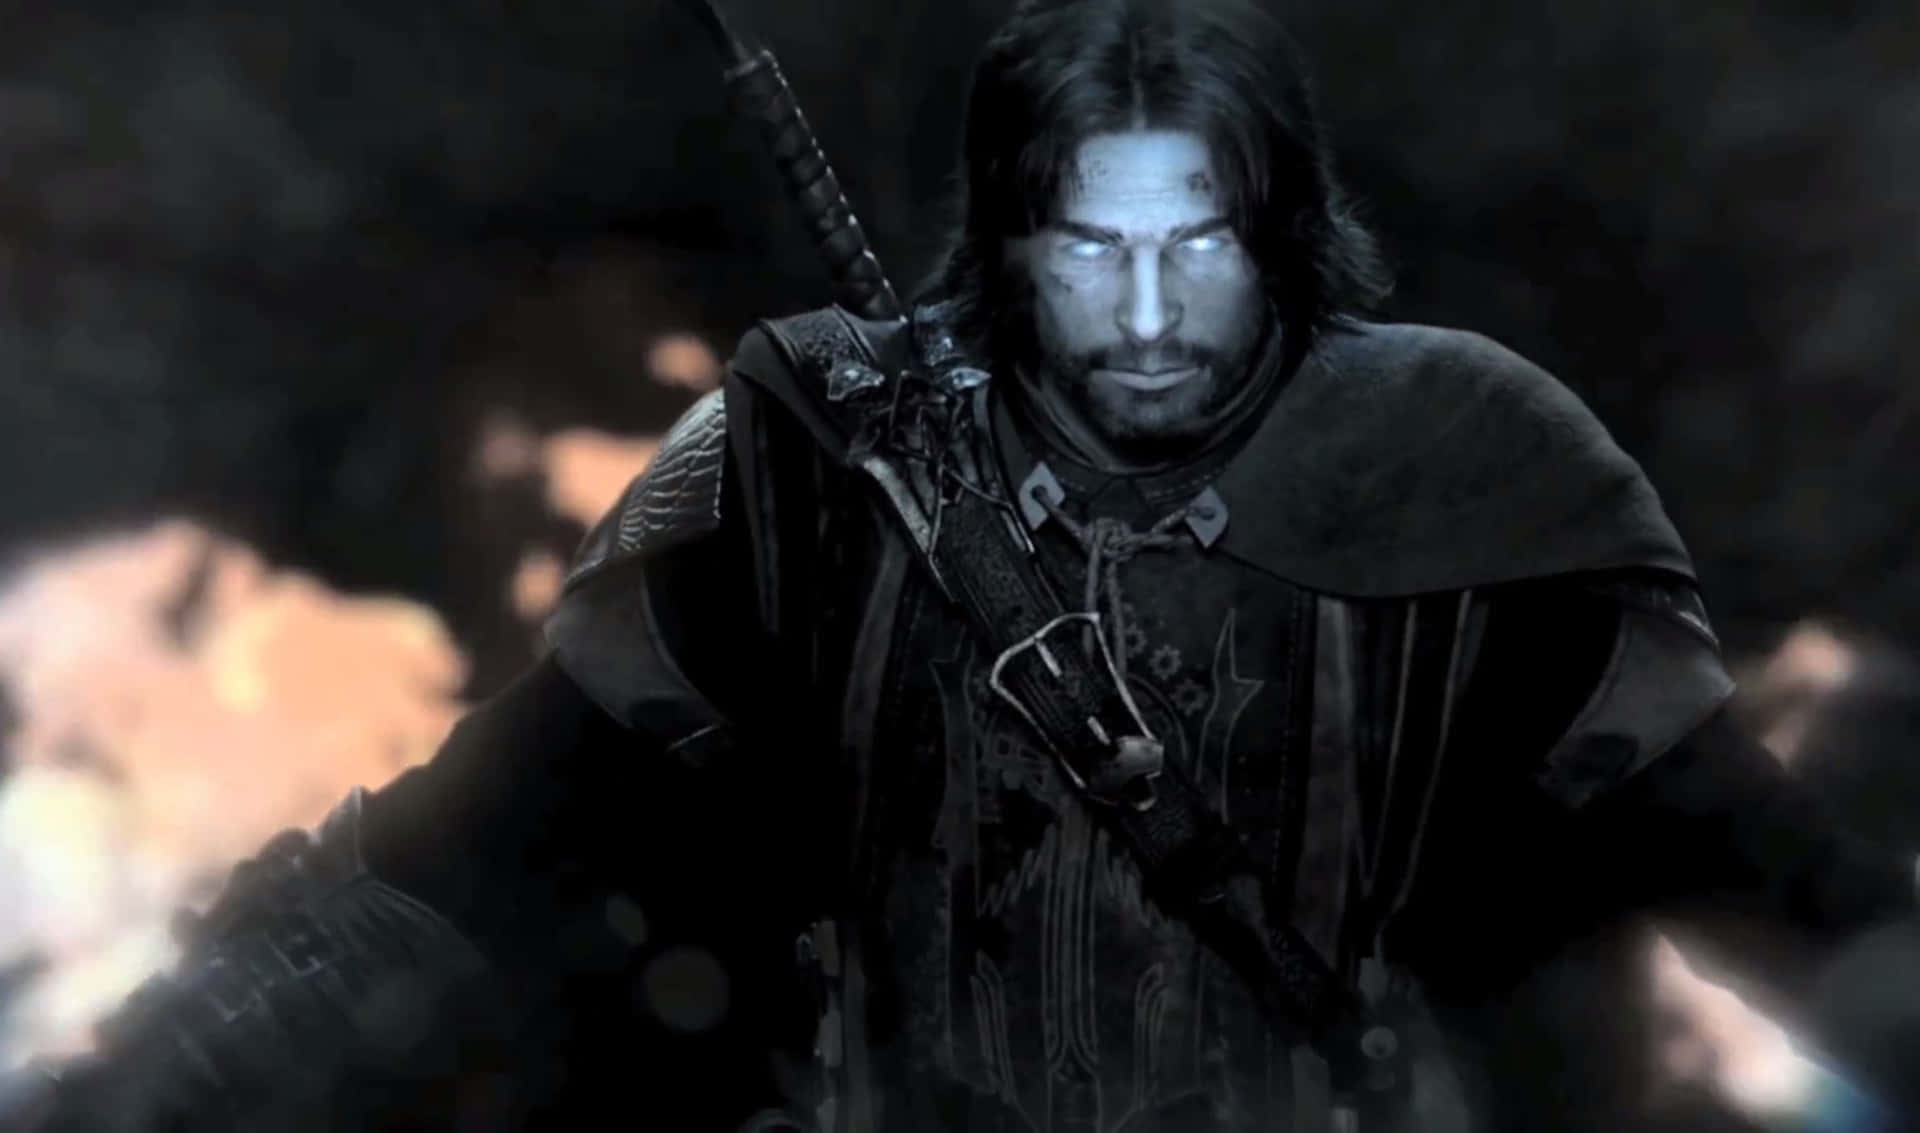 Adventure awaits in Middle-earth: Shadow of Mordor